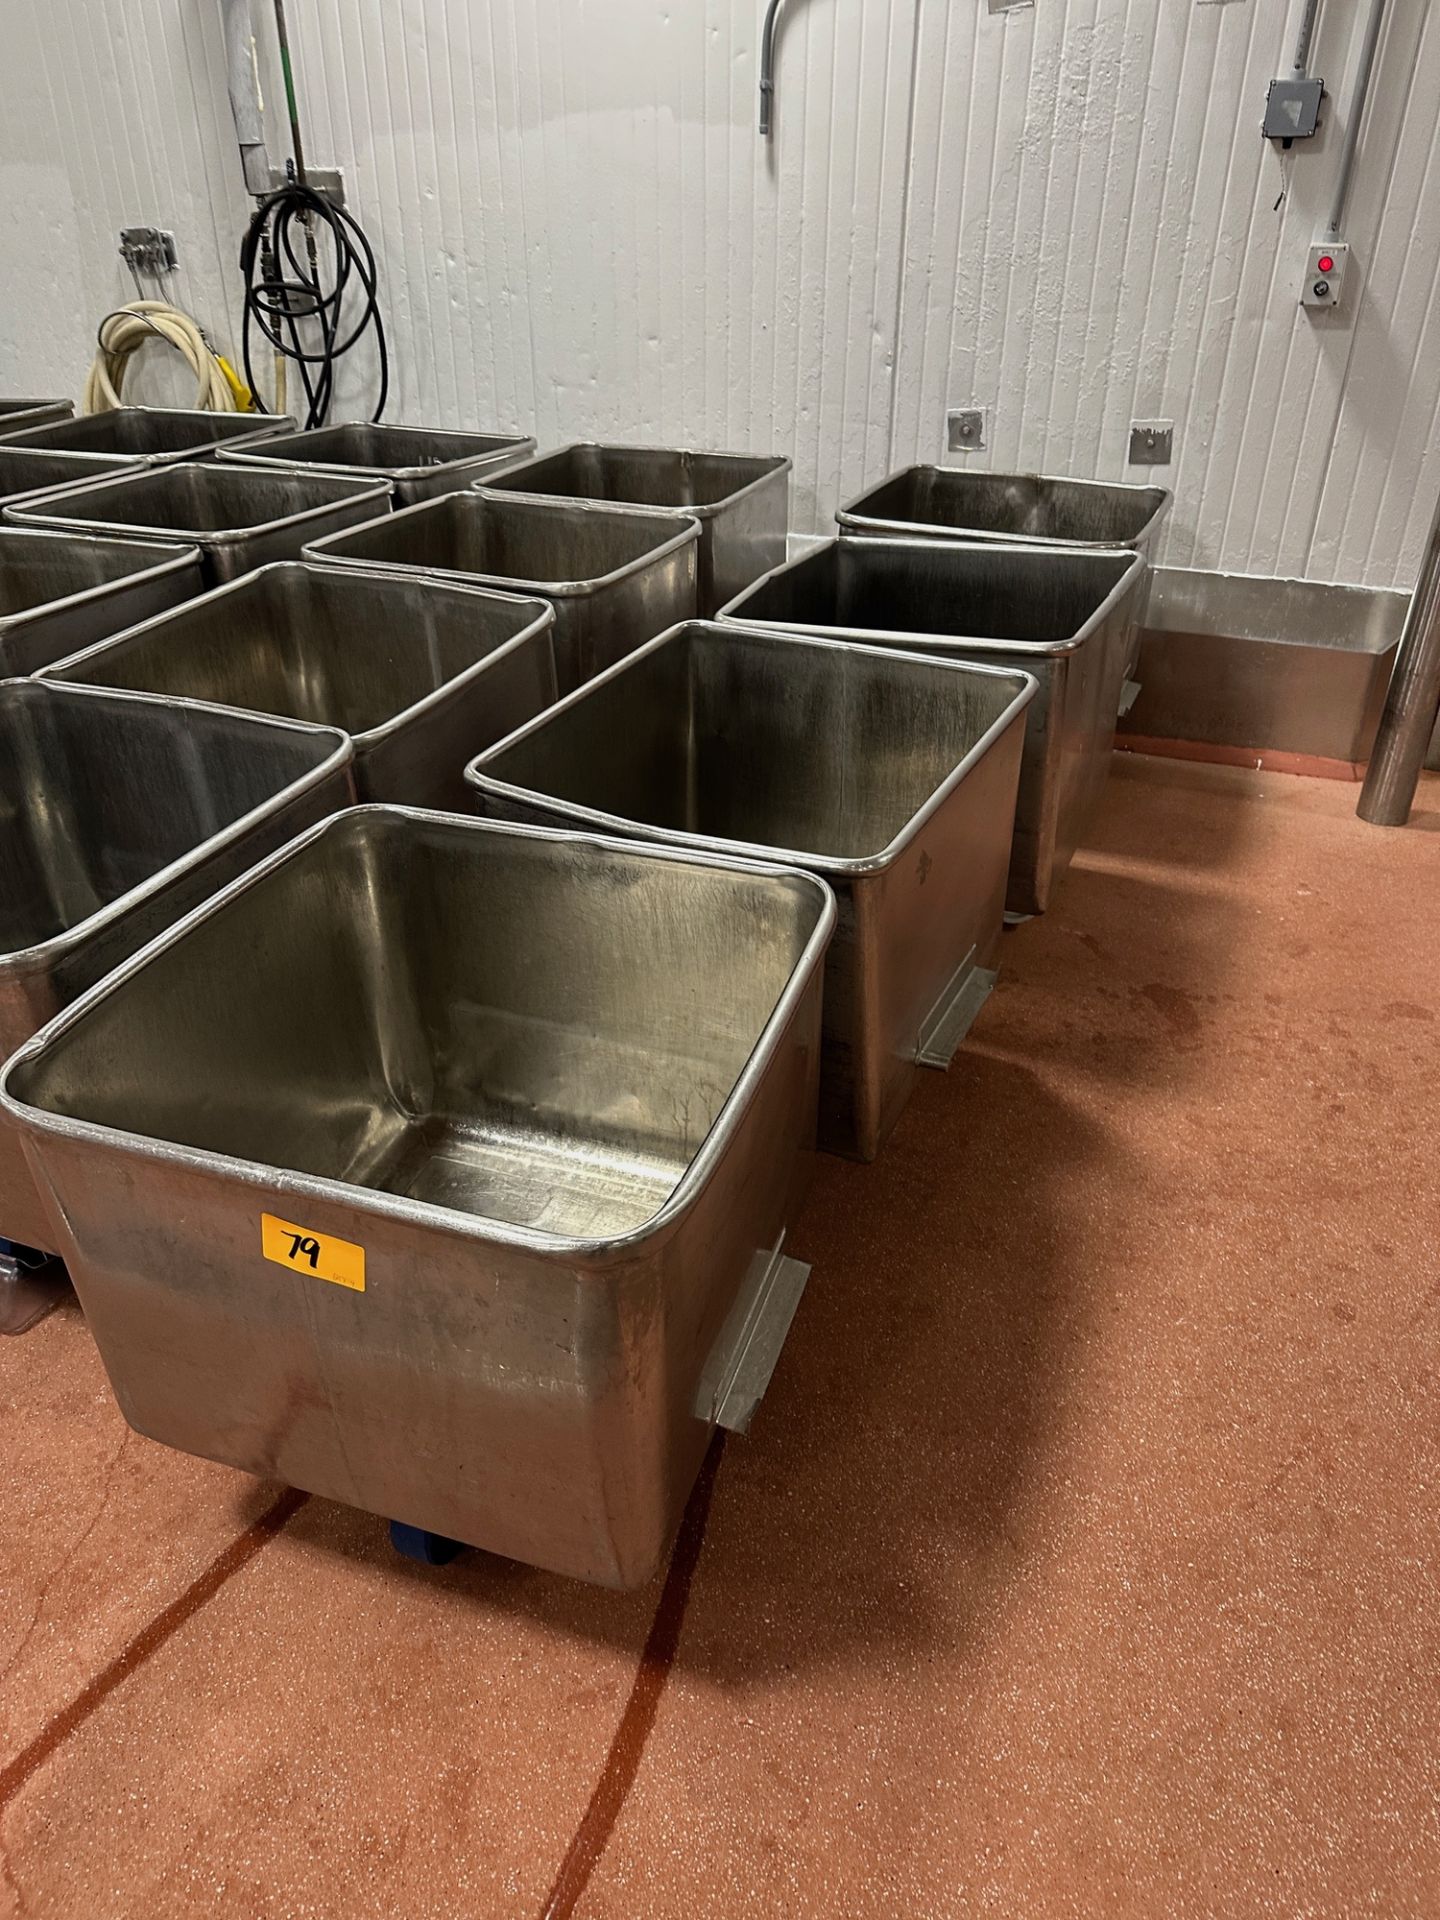 (4) 400 LB Stainless Steel Buggies | Rig Fee $50 - Image 2 of 2